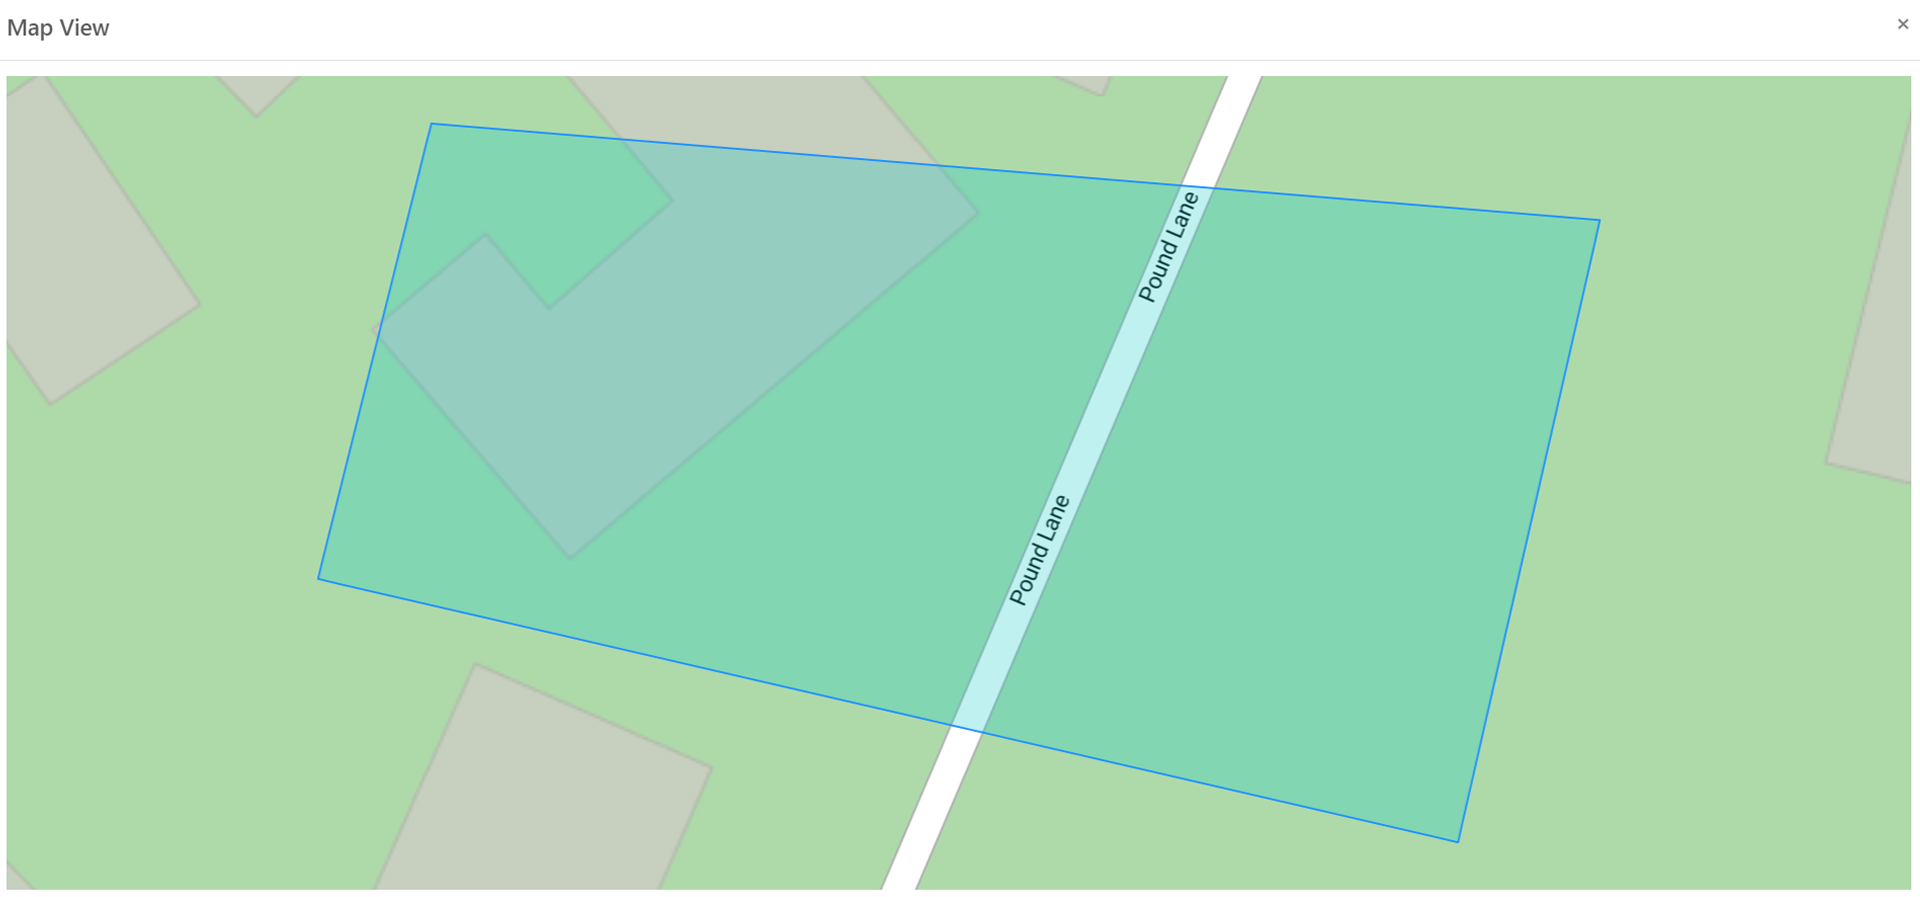 FTC Geofence map view